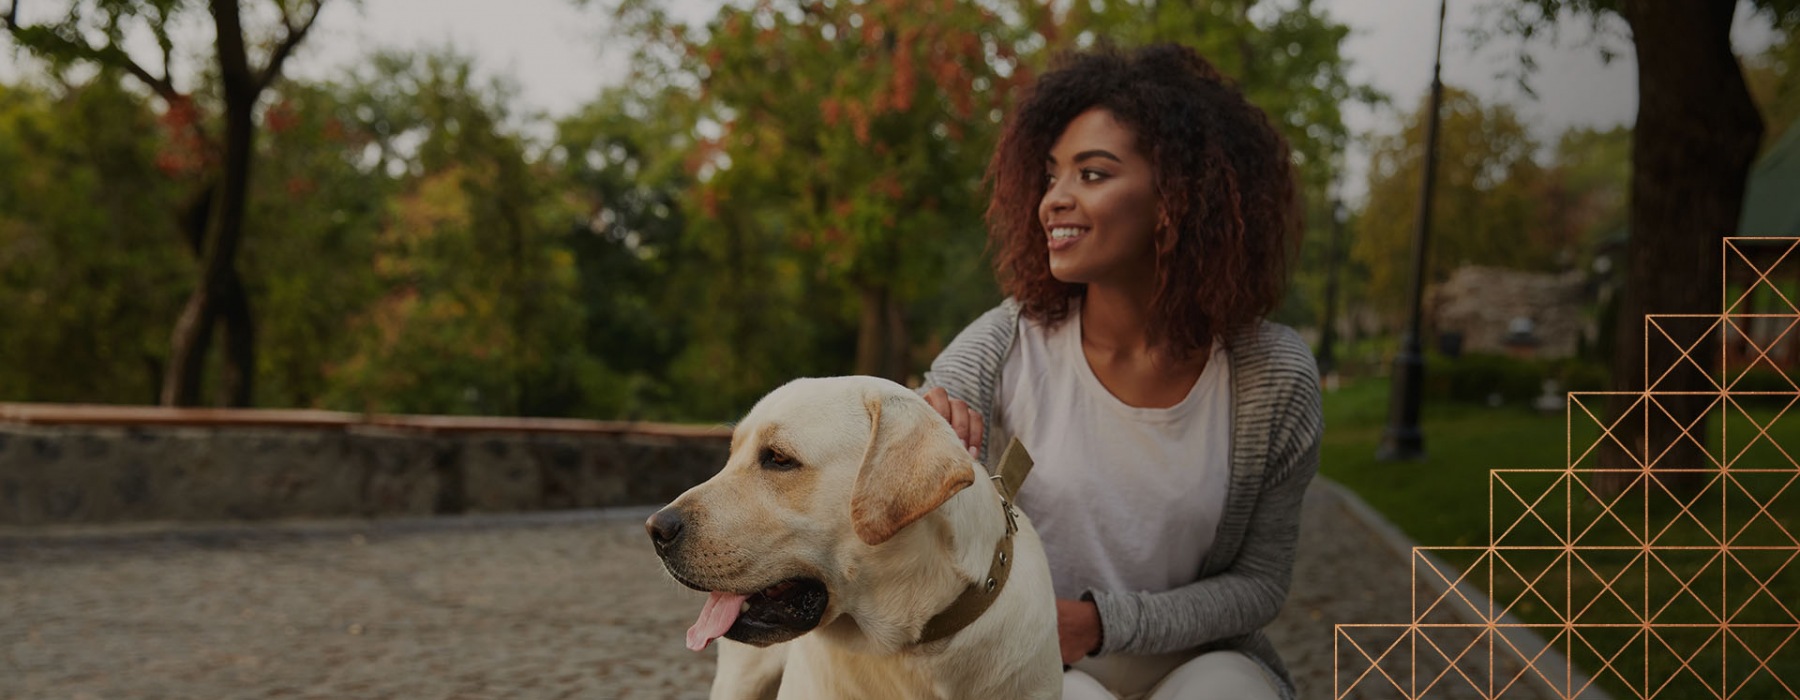 lifestyle image of a woman and her dog outdoors